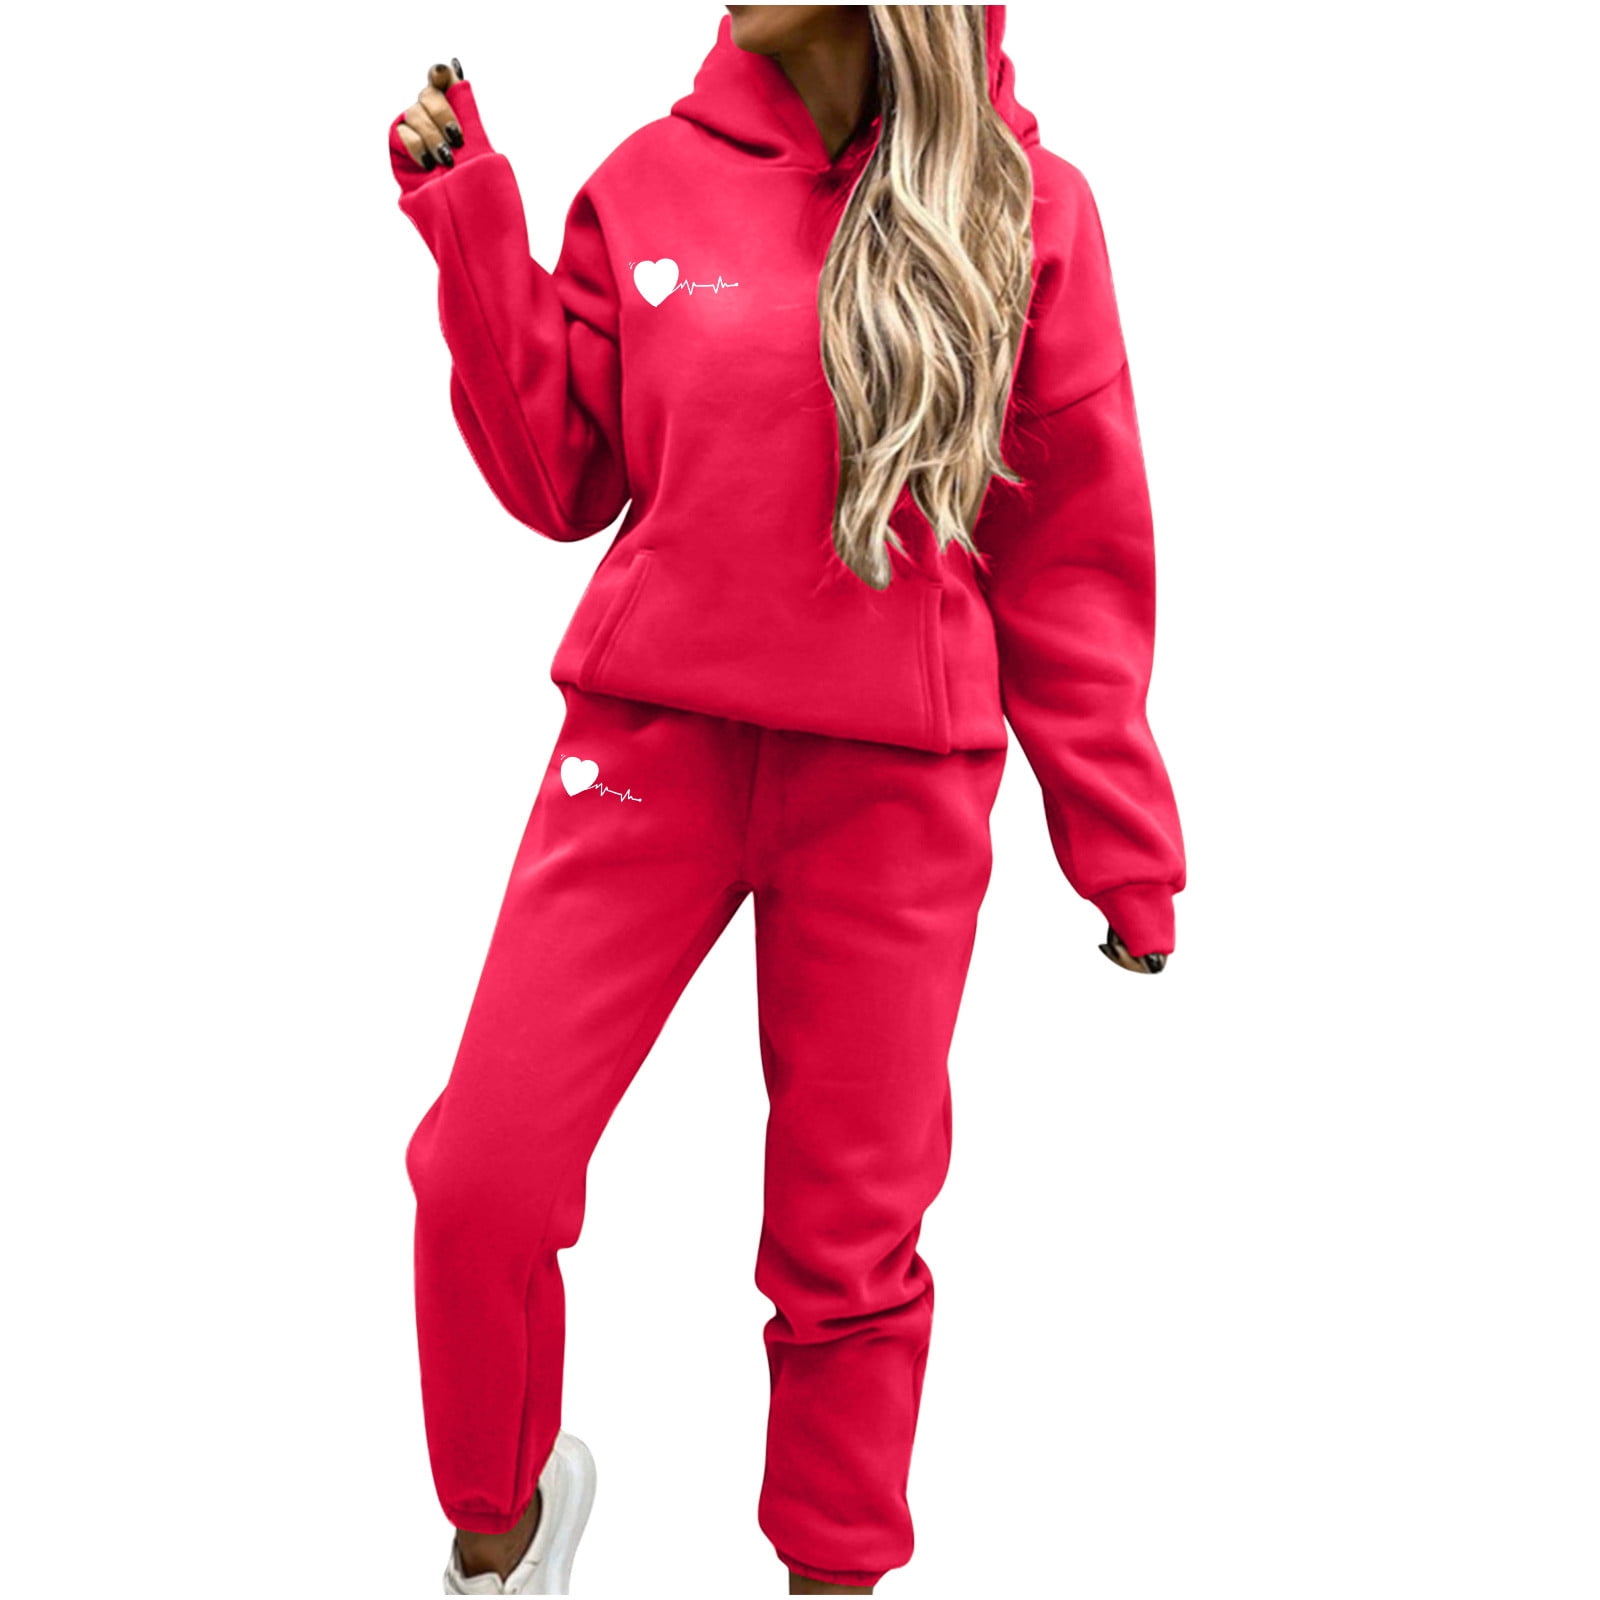 RQYYD Women's Two Piece Outfits Sweatsuit Long Sleeve Hooded